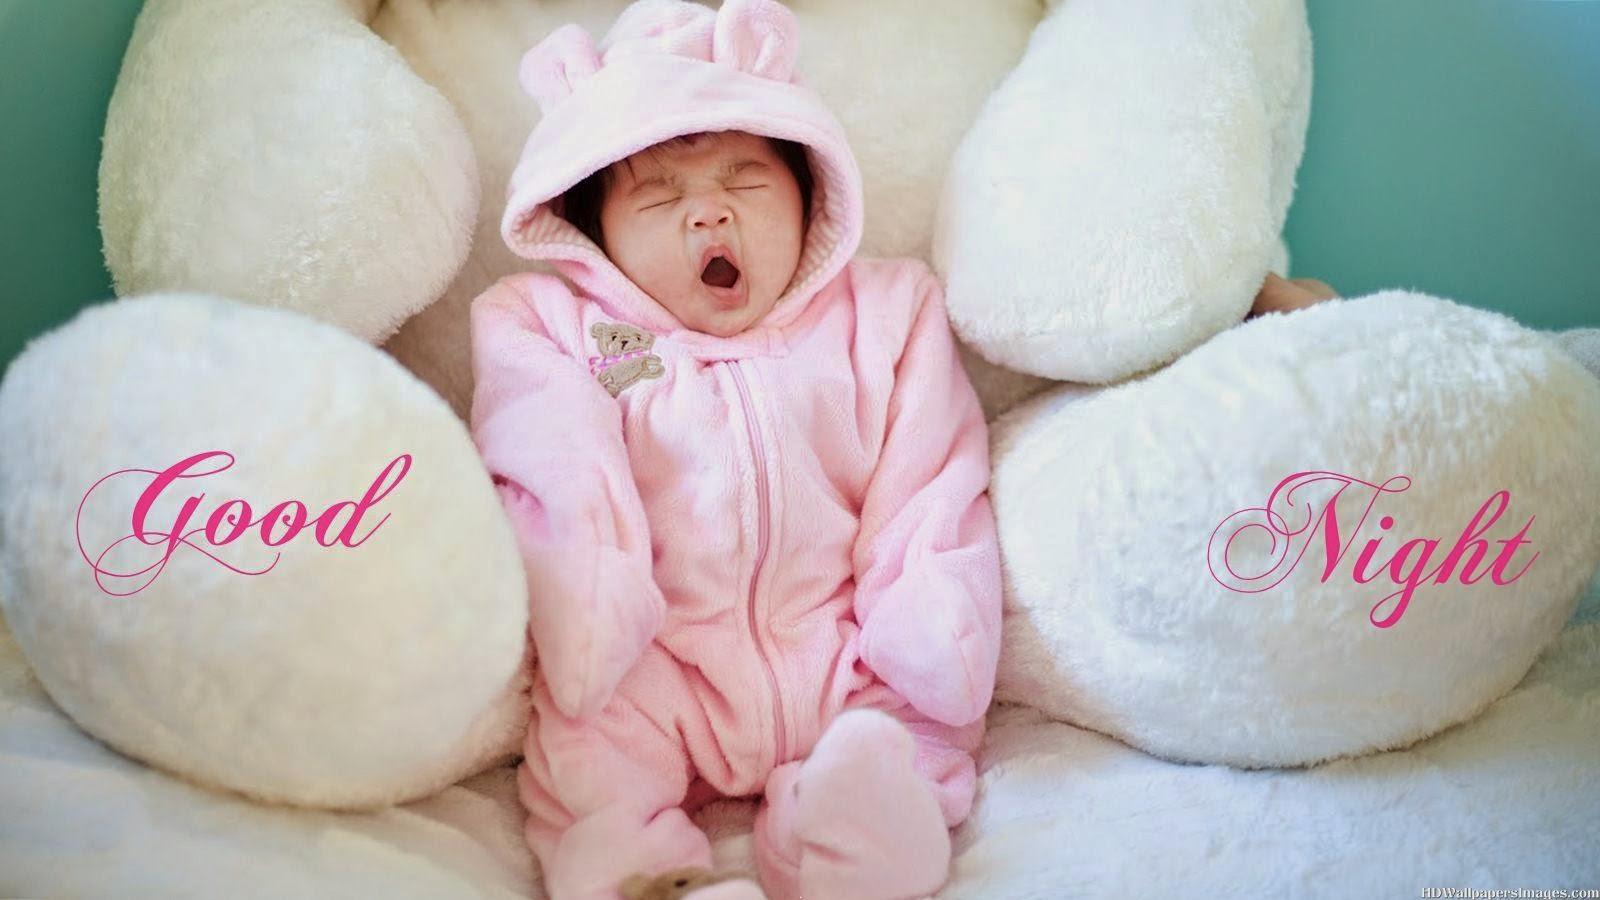 Good Night Image Baby Download , HD Wallpaper & Backgrounds